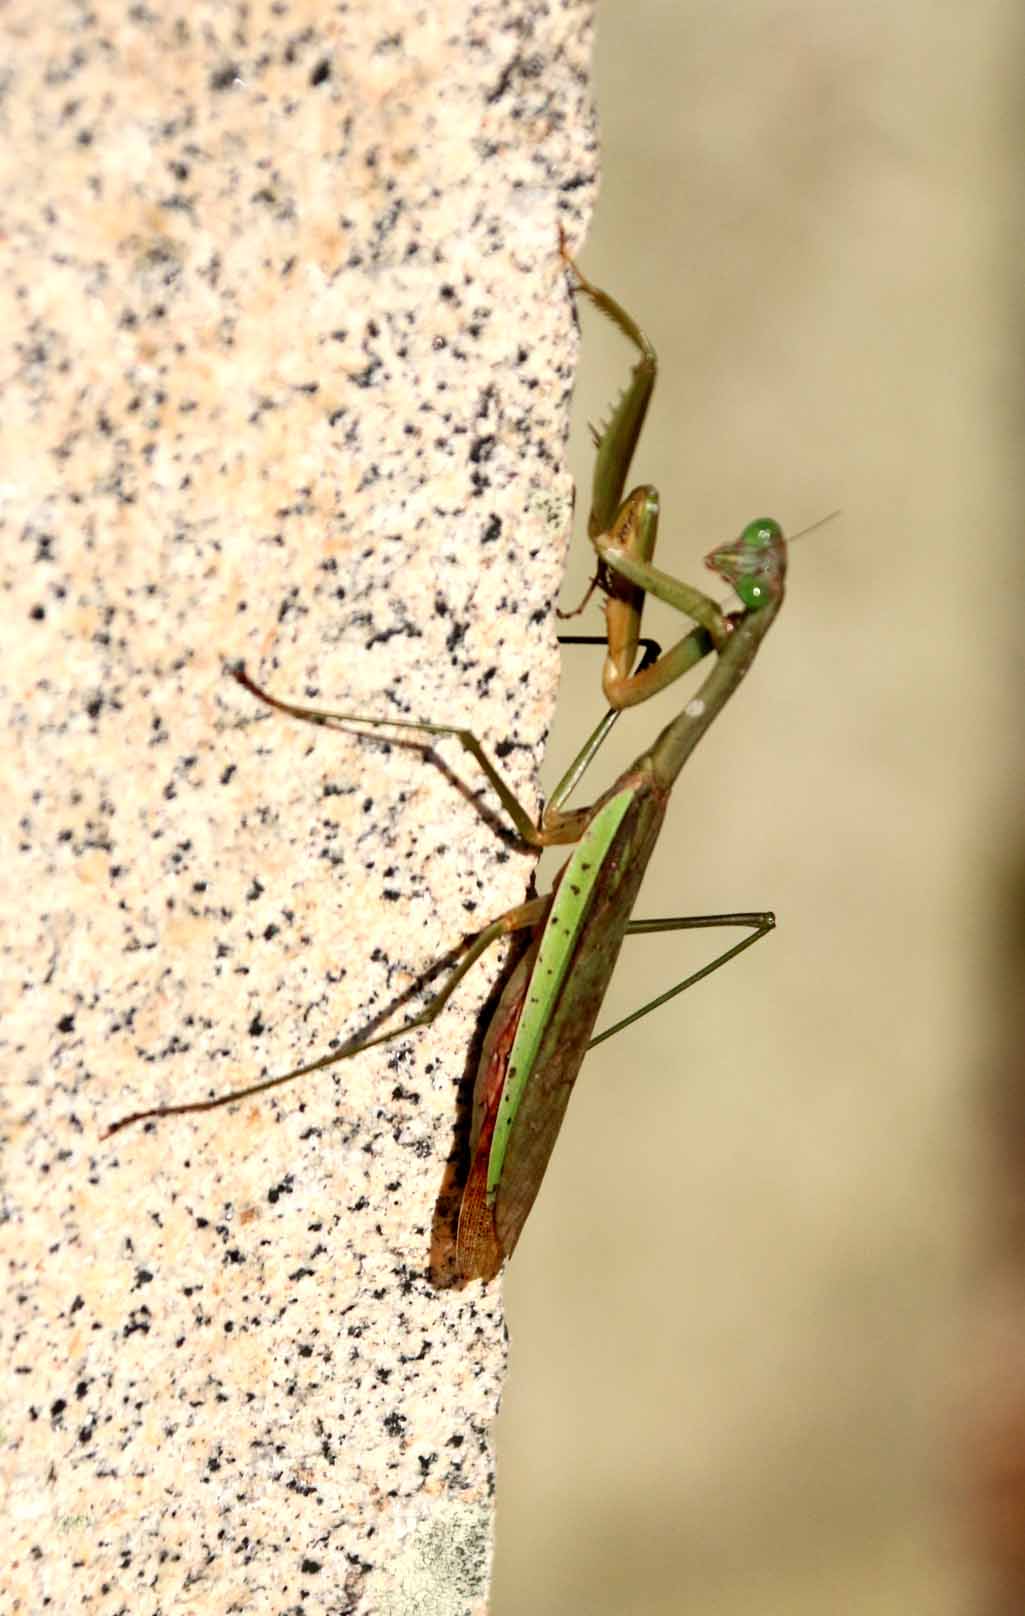 IS THIS A PREYING MANTIS OR A PRAYING MANTIS - IT IS NEAR A SHRINE